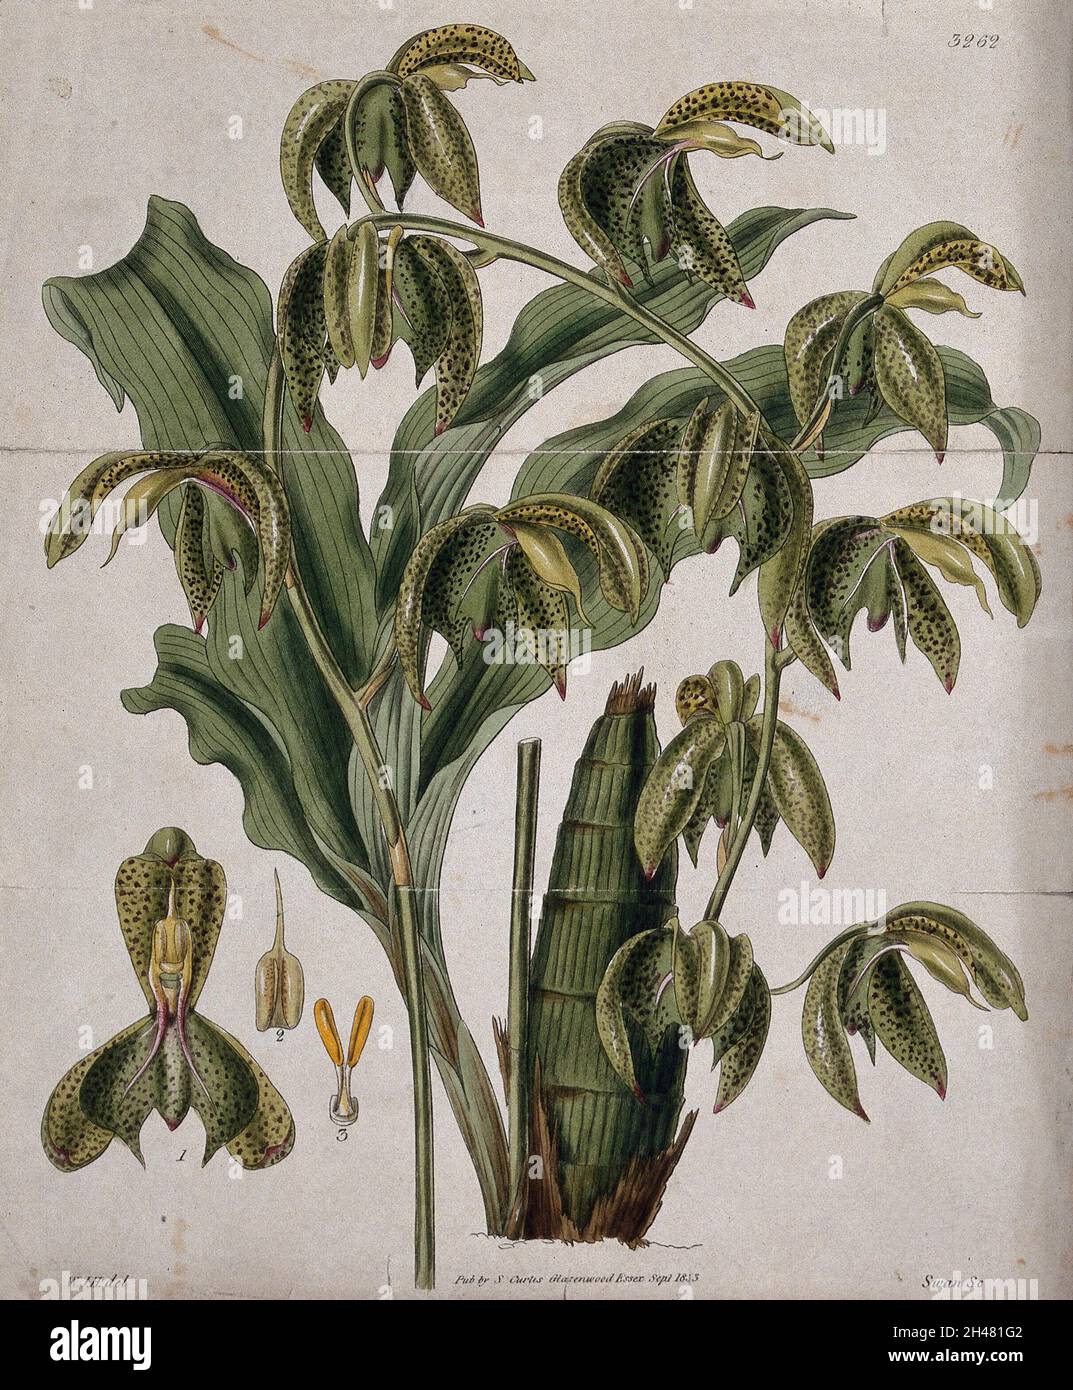 A tropical orchid (Catasetum trifidum): flowering stem, leaf and floral segments. Coloured engraving by J. Swan, c. 1833, after W. Hooker. Stock Photo